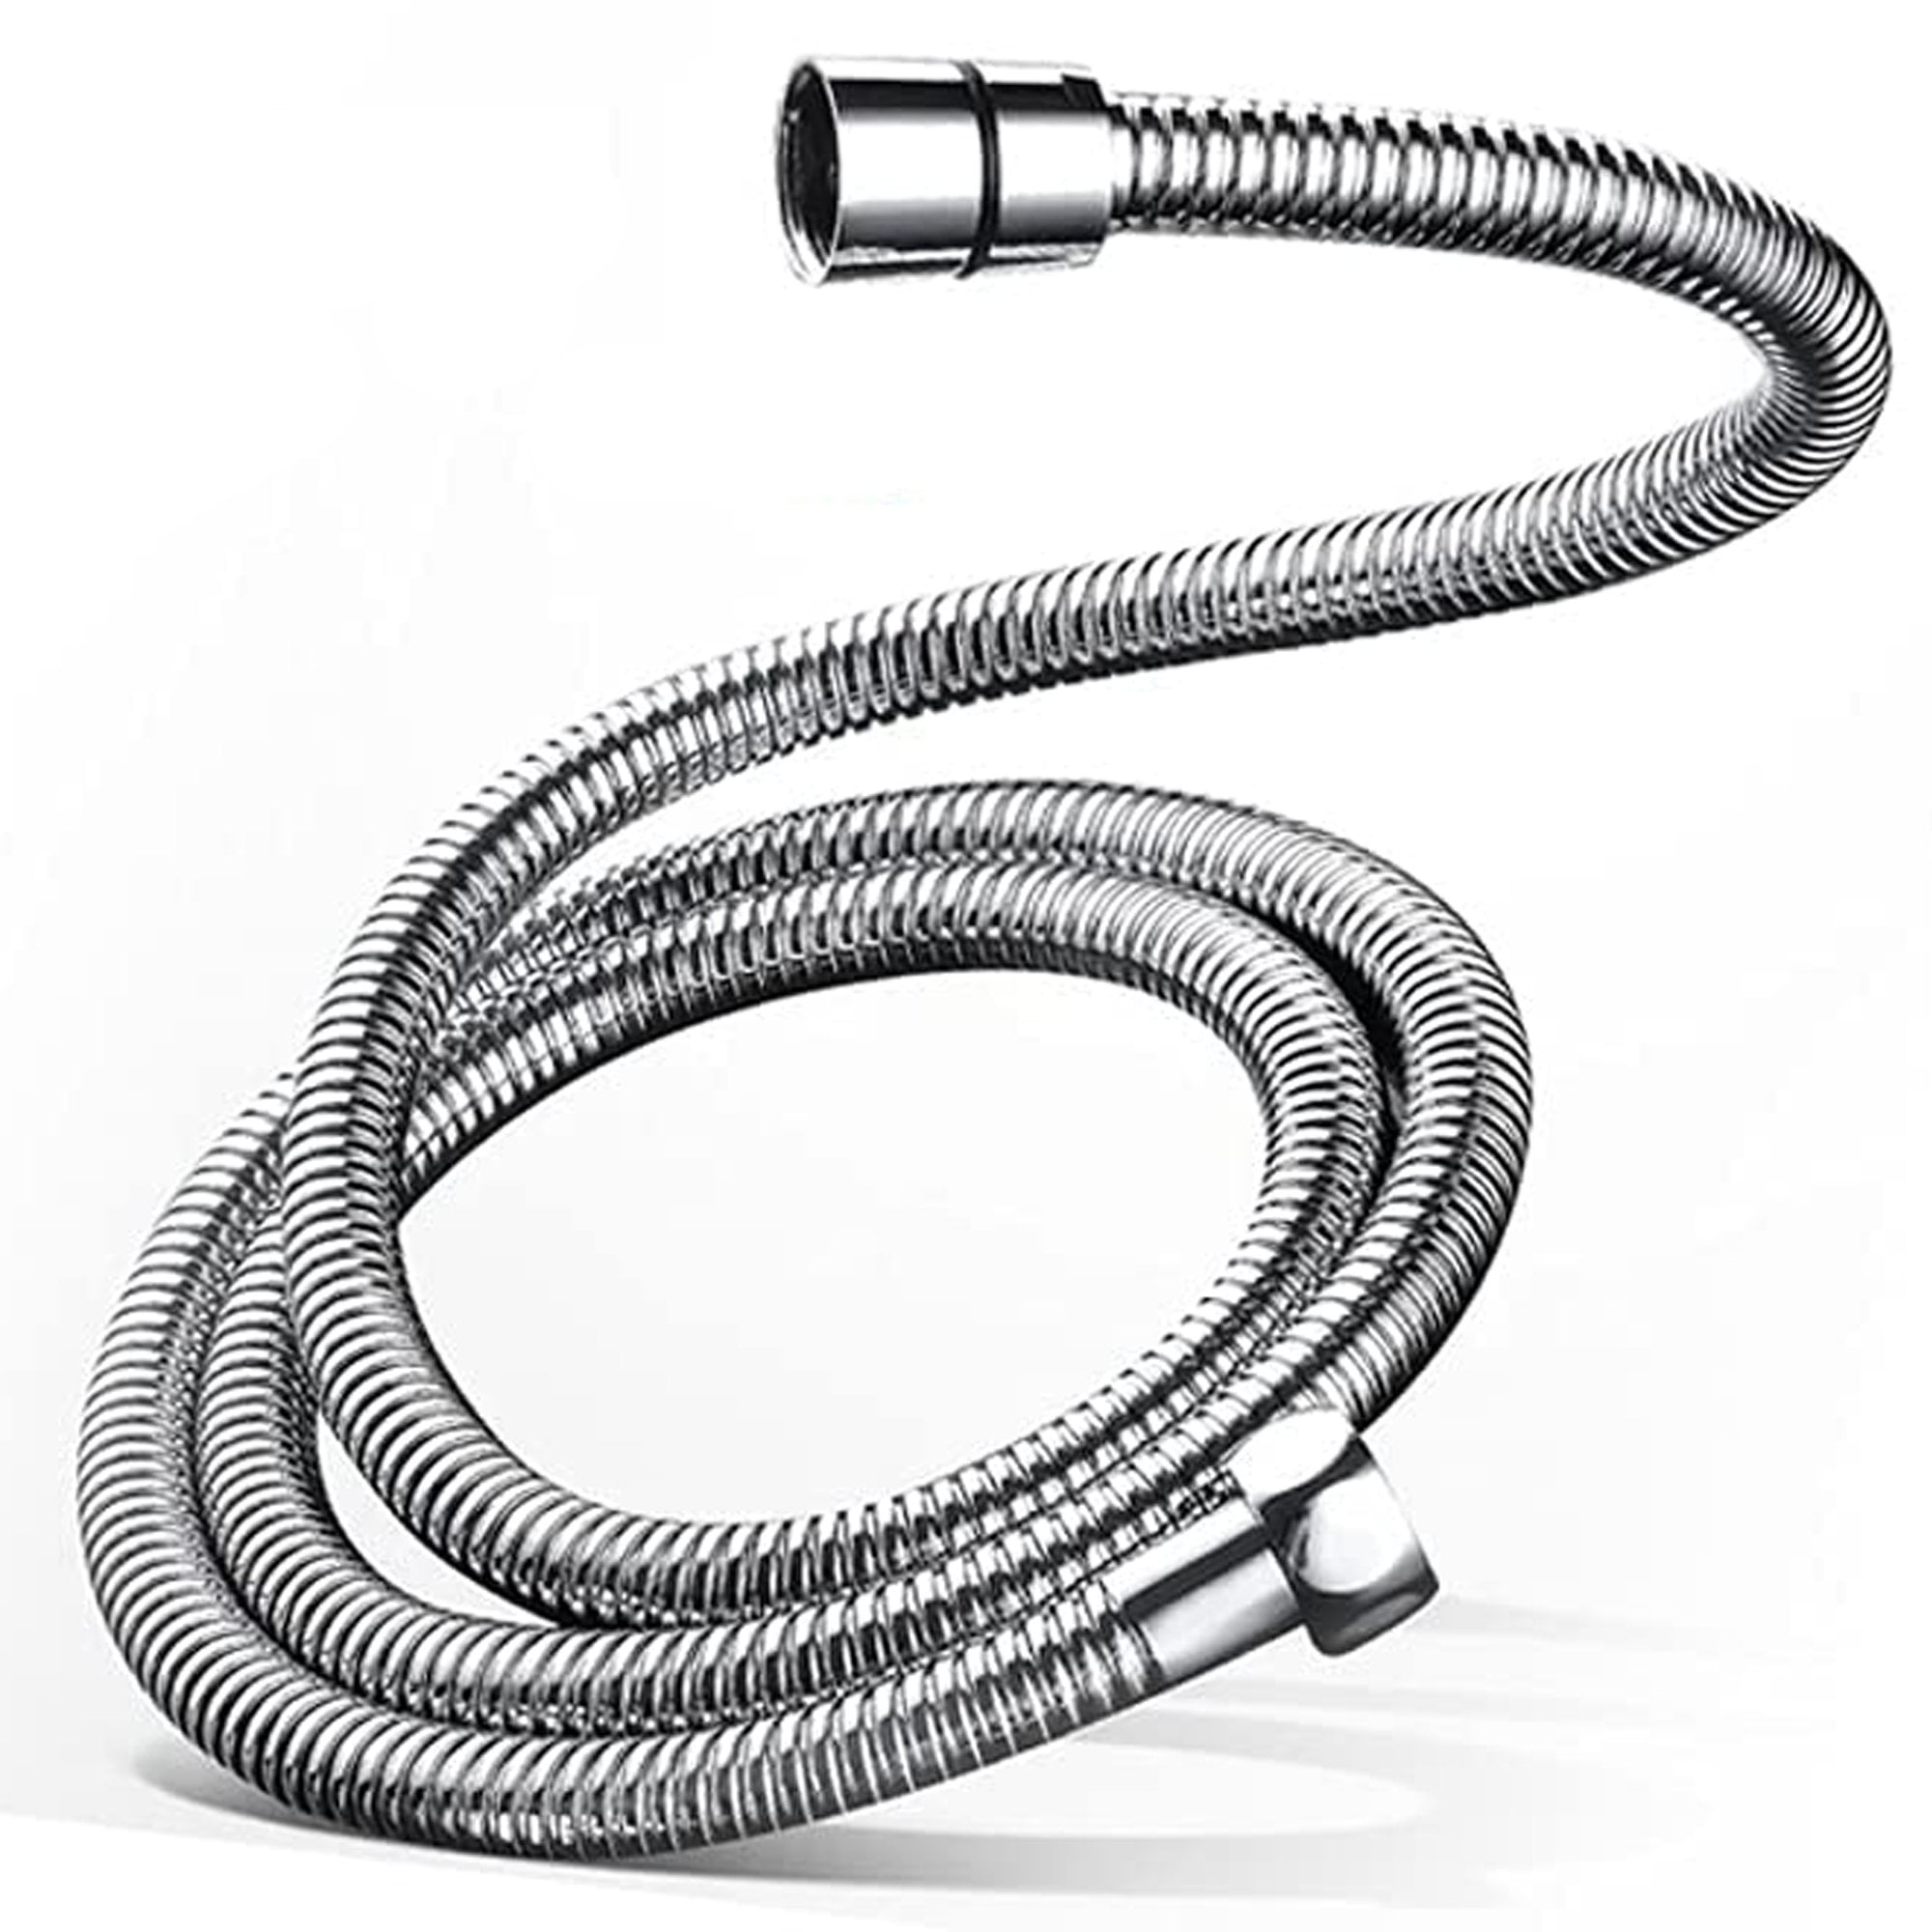 60 Inch Long Brass Fitting Flexible Stainless Steel Replacement Shower Hose .orb for sale online 